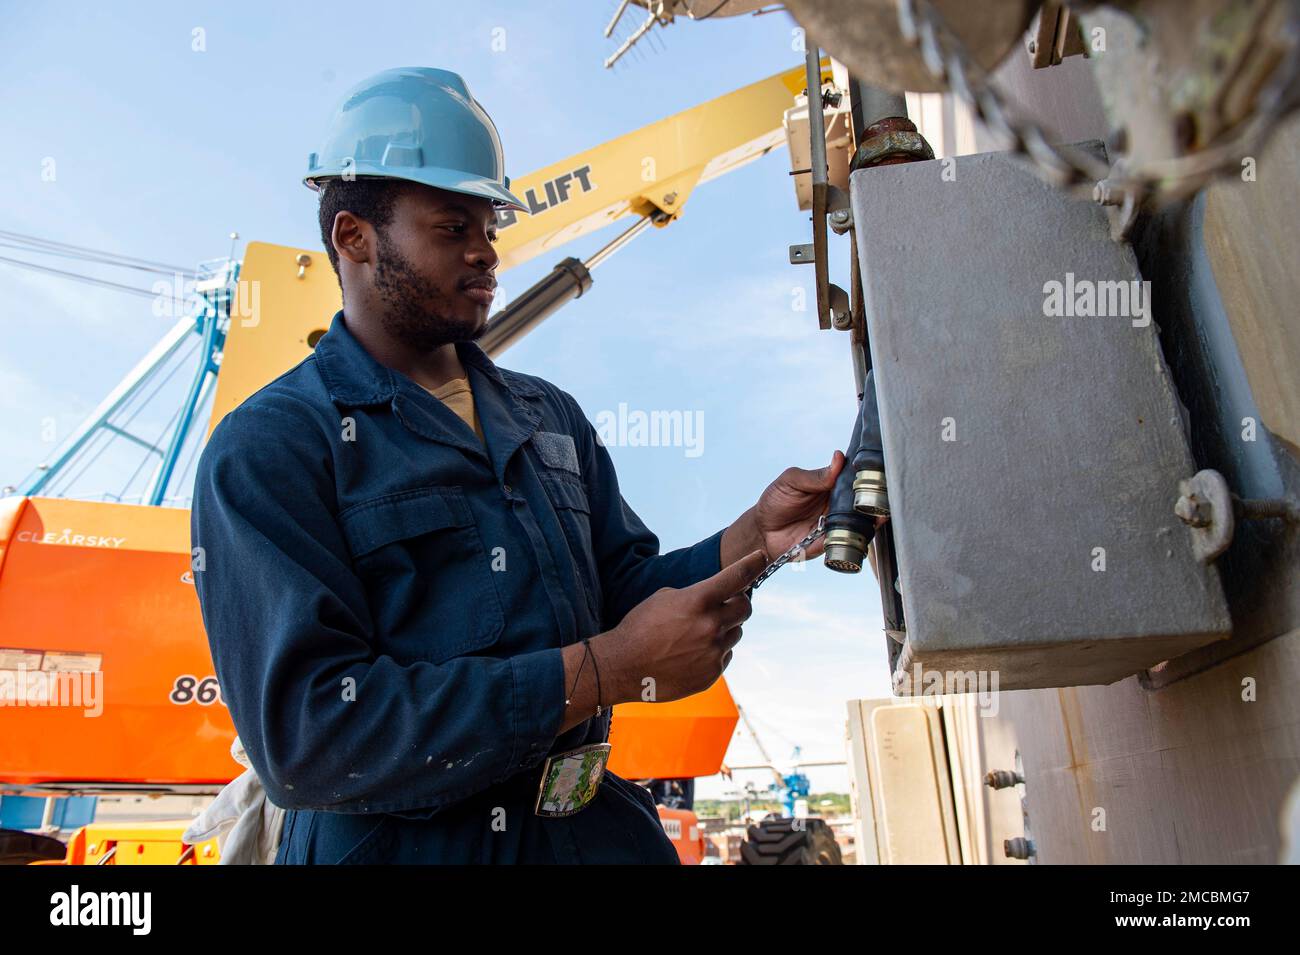 220628-N-YP095-1007 PORTSMOUTH, Va. (June 28, 2022) Electronics Technician Seaman Monterrious Bishop, from Tuscaloosa, Alabama, inspects an alignment output box aboard the Nimitz-class aircraft carrier USS Dwight D. Eisenhower (CVN 69). Ike is currently pierside at Norfolk Naval Shipyard in the basic phase of the optimized fleet response plan (OFRP). Stock Photo